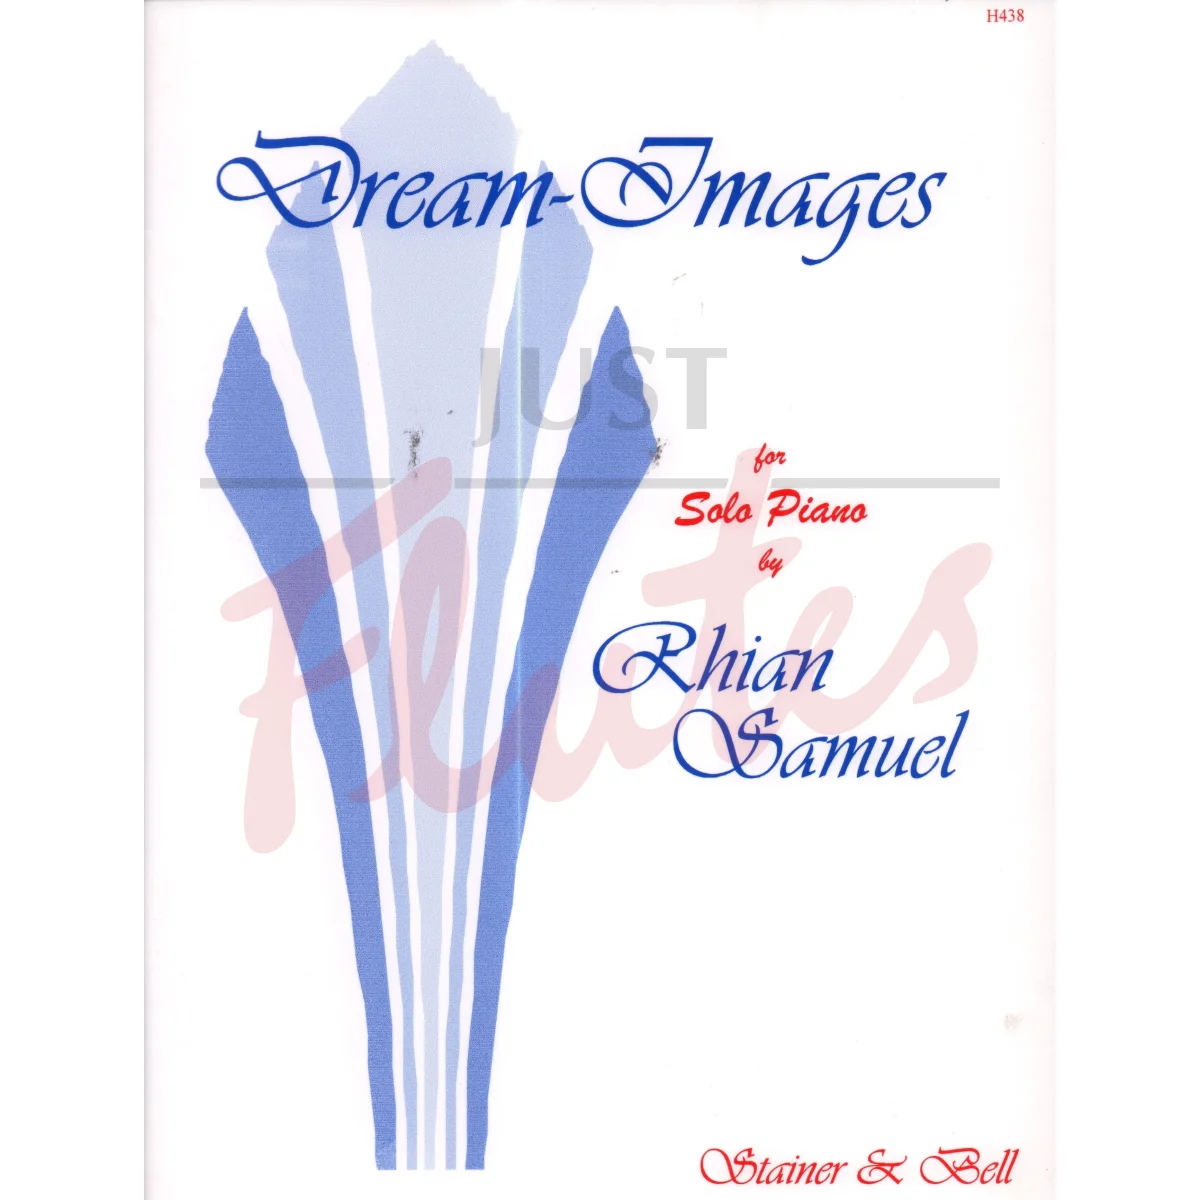 Dream-Images for Piano